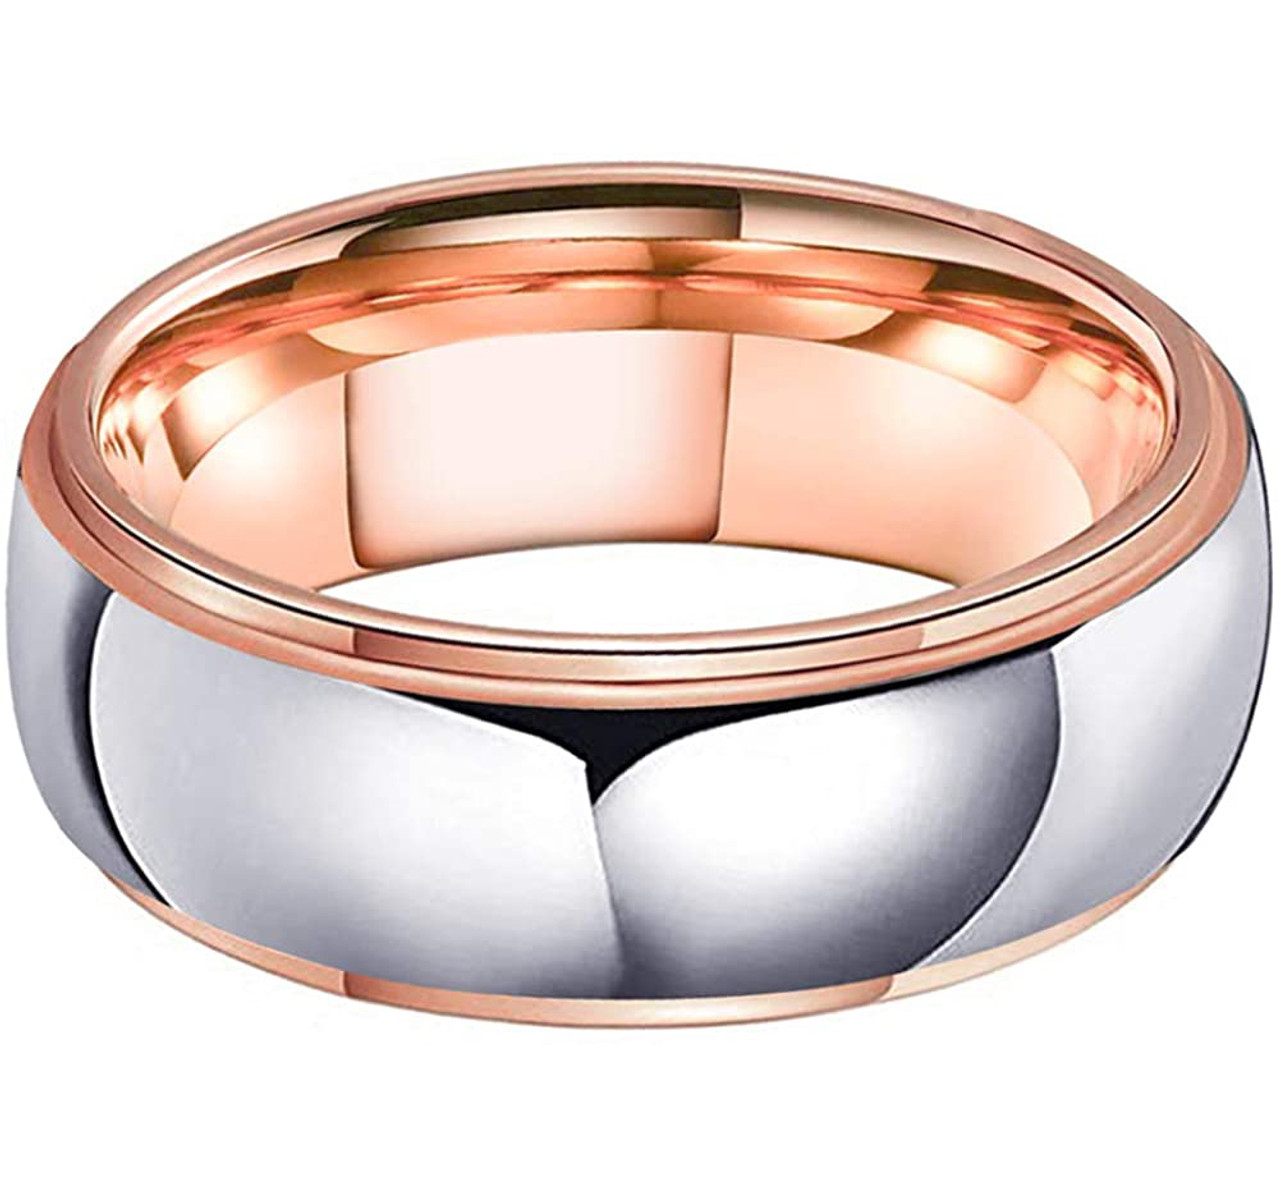 Women's or Men's Tungsten Wedding Band (8mm). Rose Gold and Silver Dome Gunmetal Bridal Ring. Tungsten Carbide Wedding Ring. Mens Jewelry